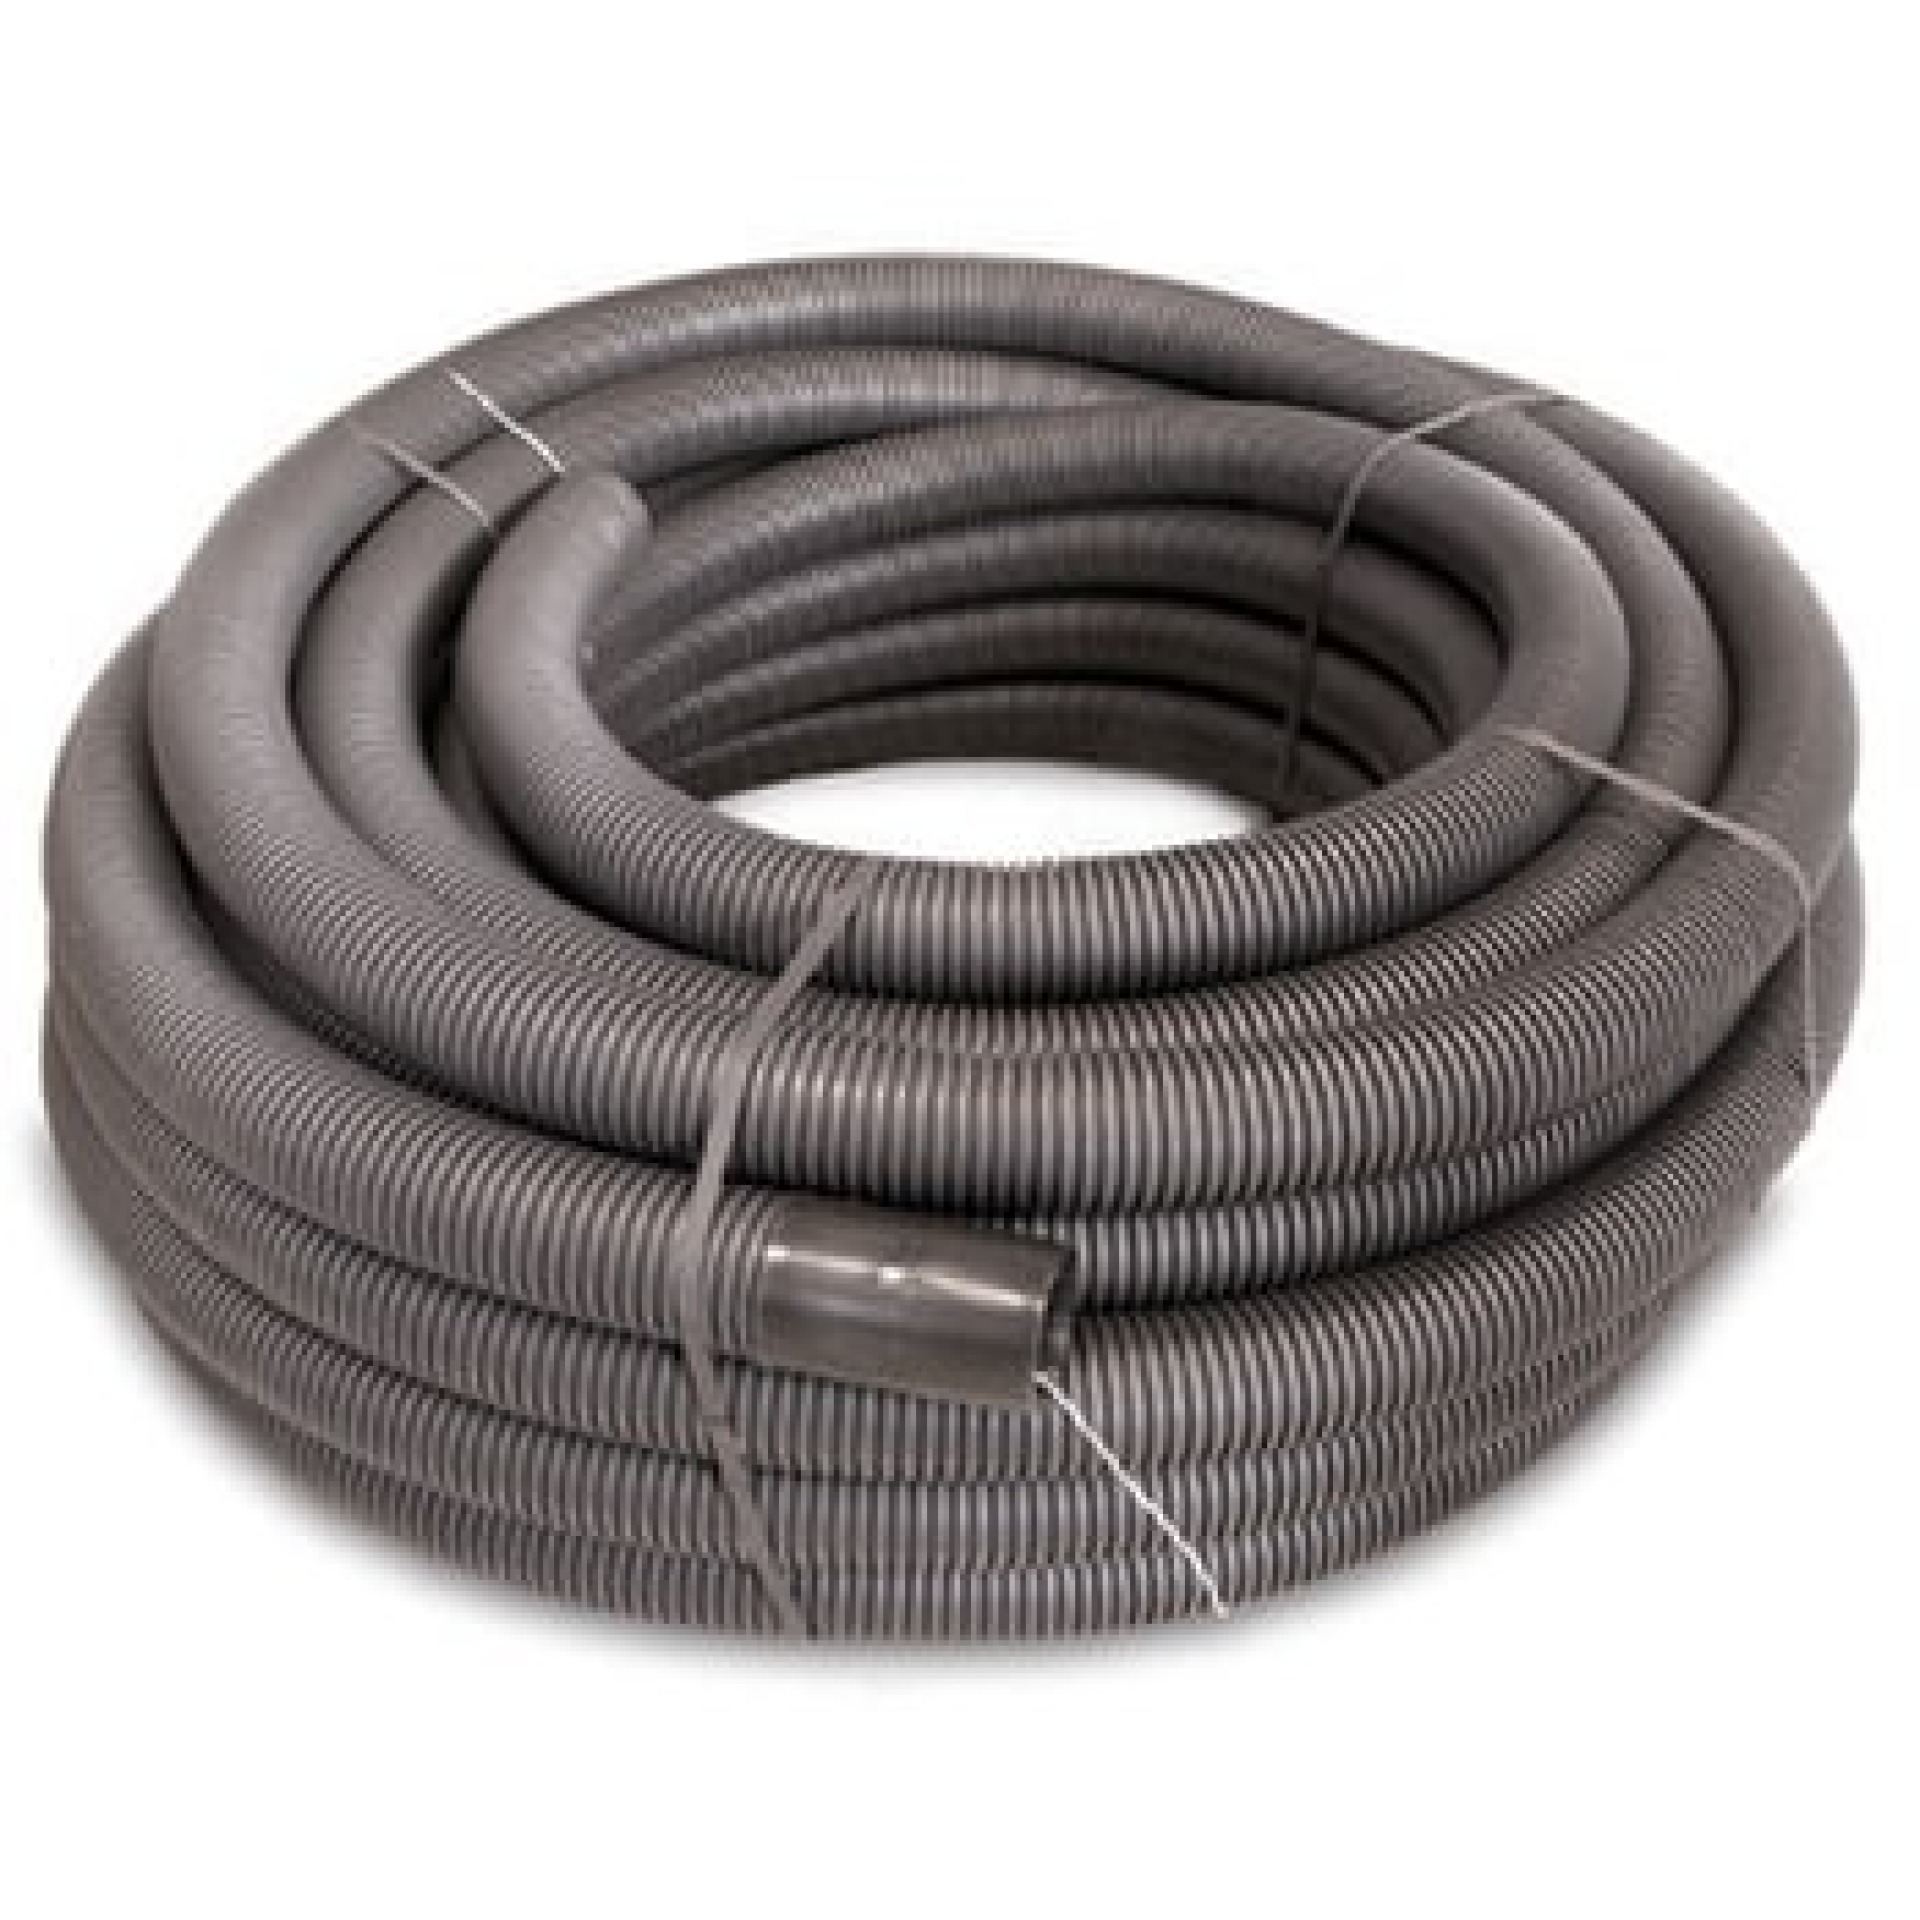 Flexible Conduit 50mm halogenfree, dobb wall, with draw-in wire black